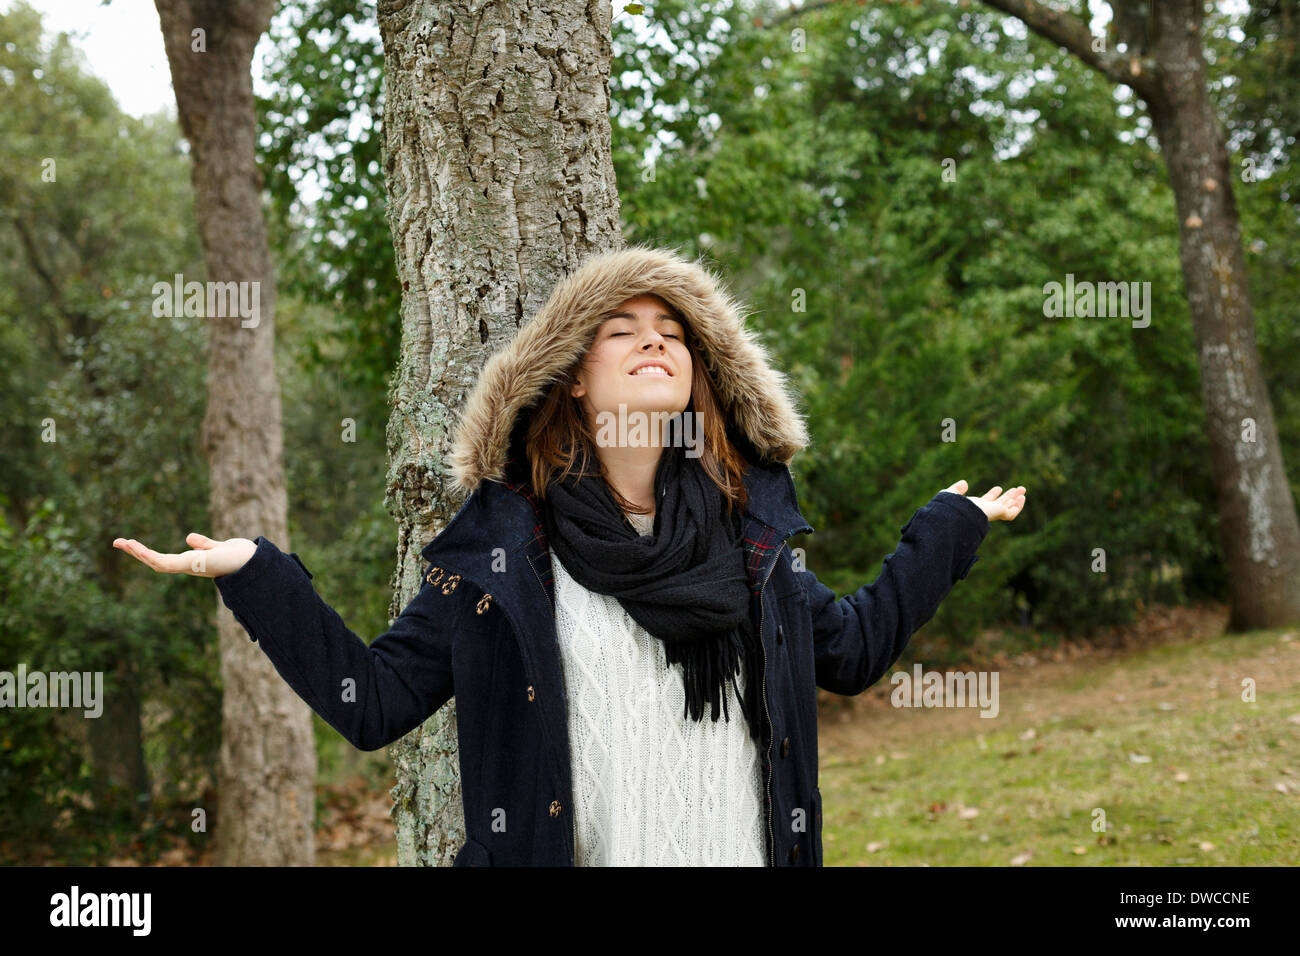 Young woman enjoying air in forest Stock Photo